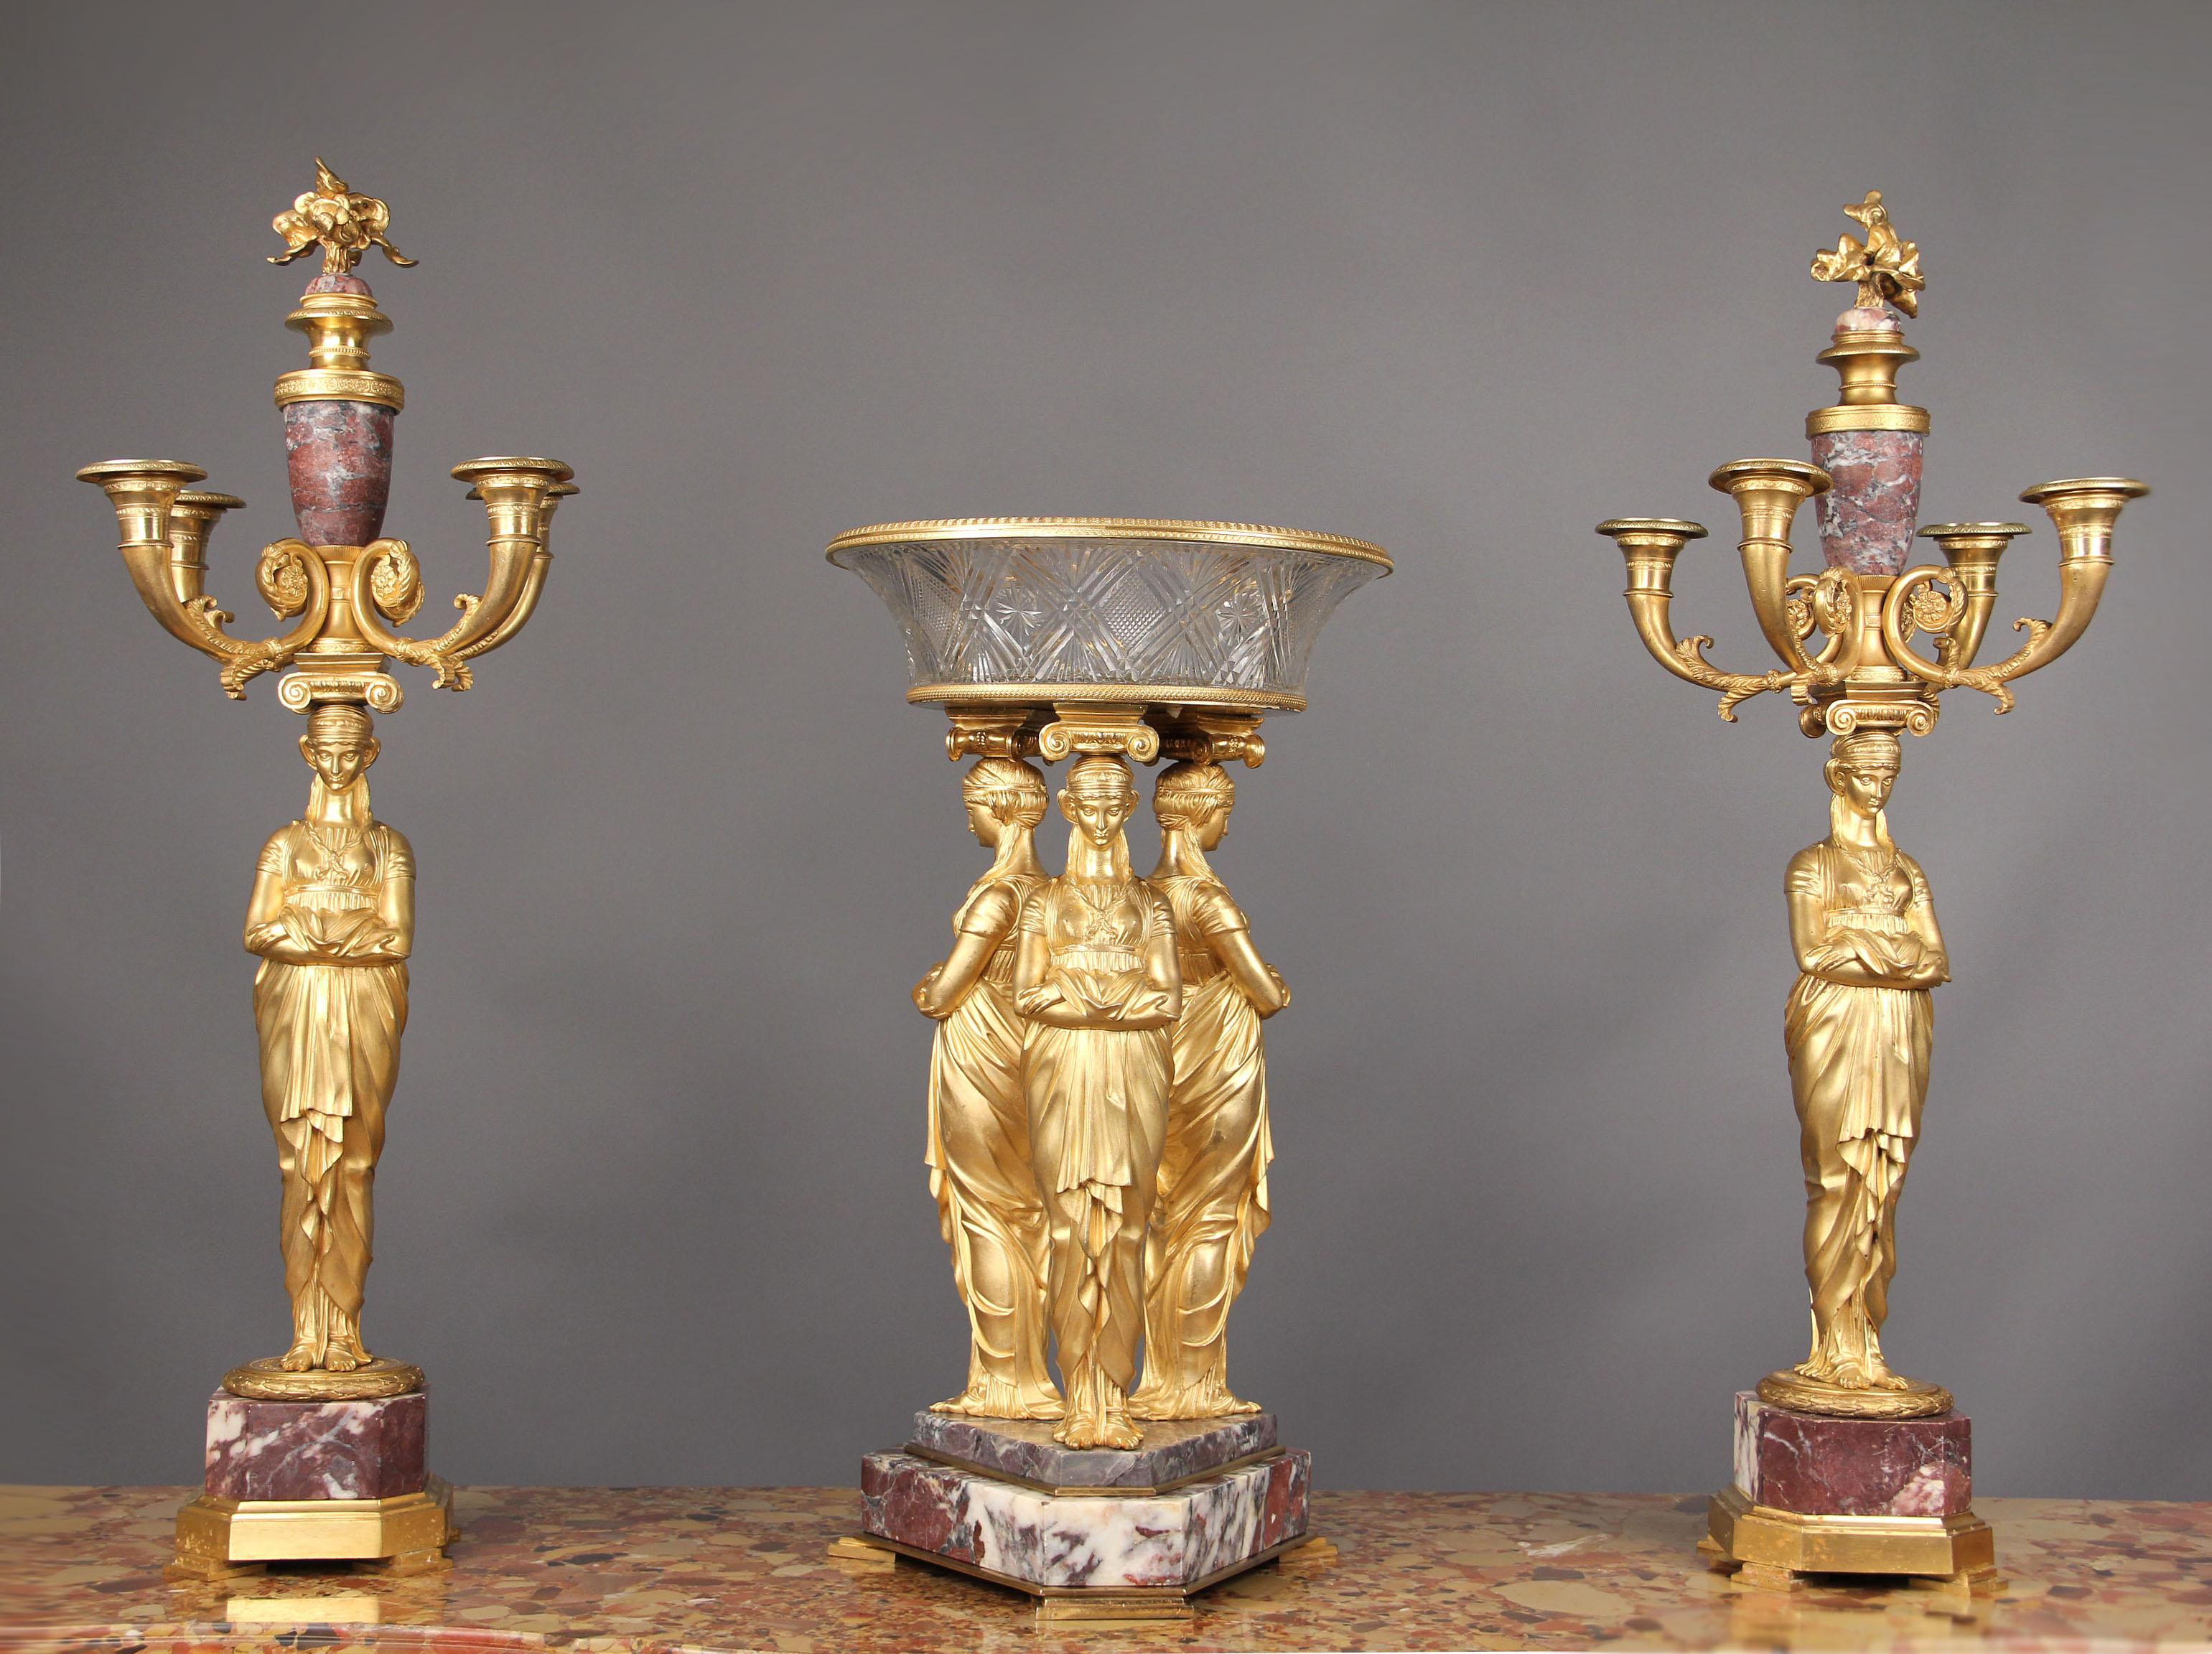 A fantastic late 19th century Empire style gilt bronze and Fleur de Pecher marble three-piece garniture.

The tazza modeled with three classical muses supporting ionic capitals and a flamining cut crystal bowl raised on a stepped tripartite marble